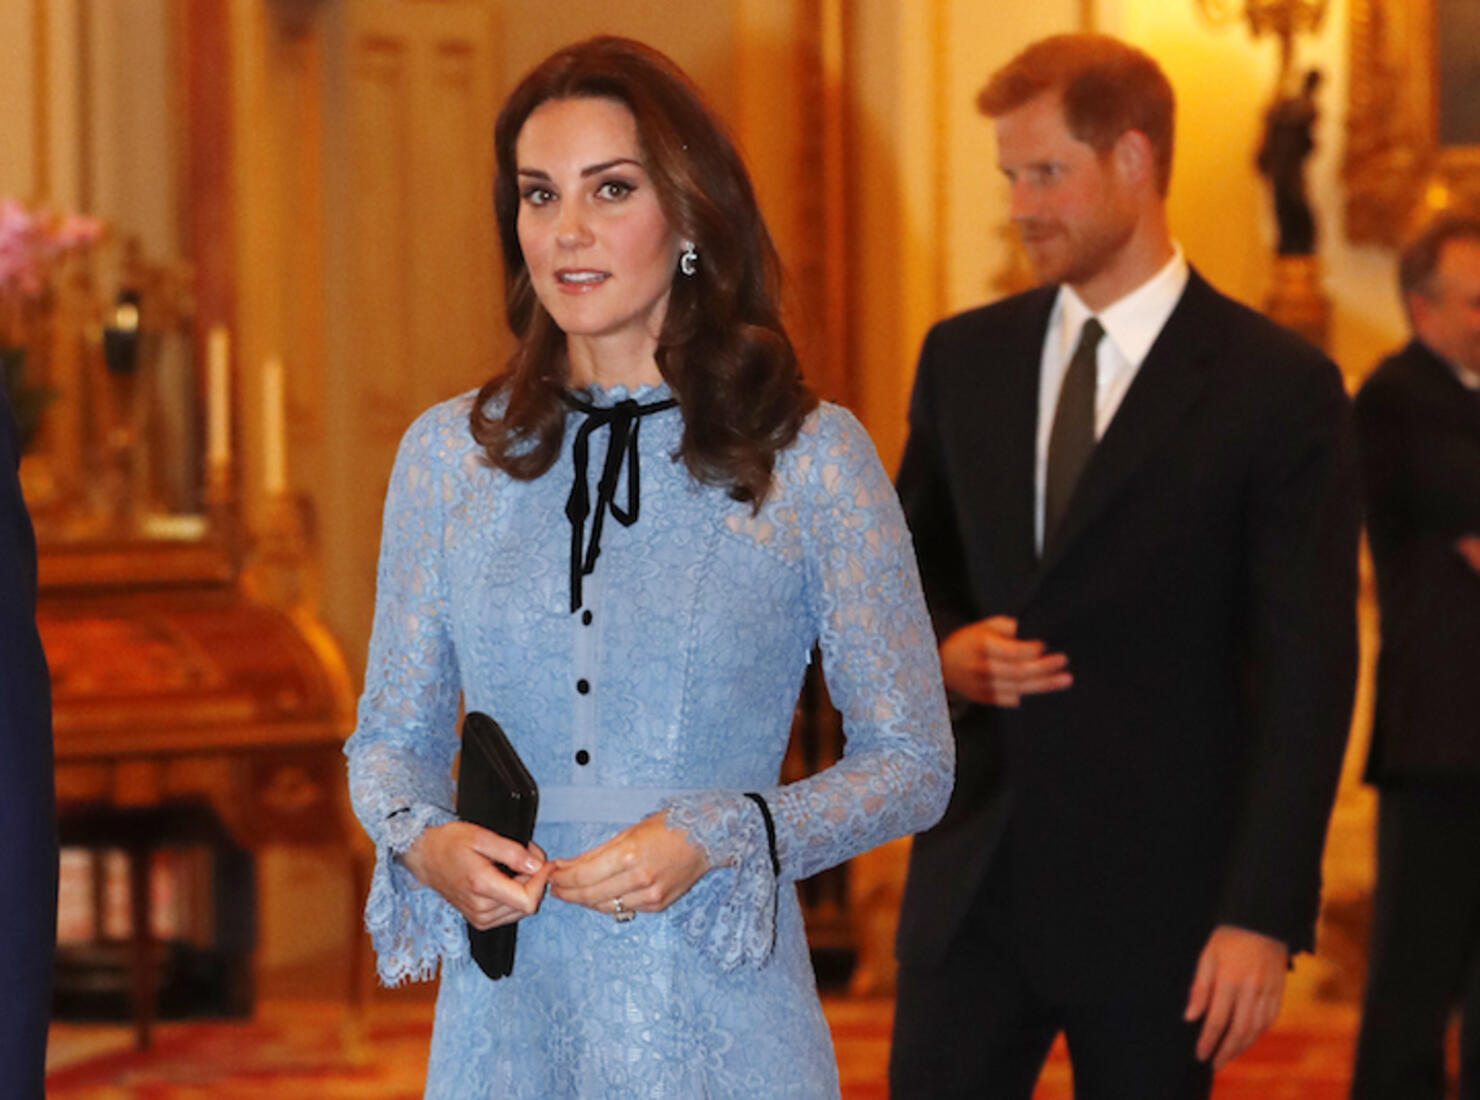 Pregnant Kate Middleton Was Bump-Shamed for Looking ‘Too Thin’ | iHeart